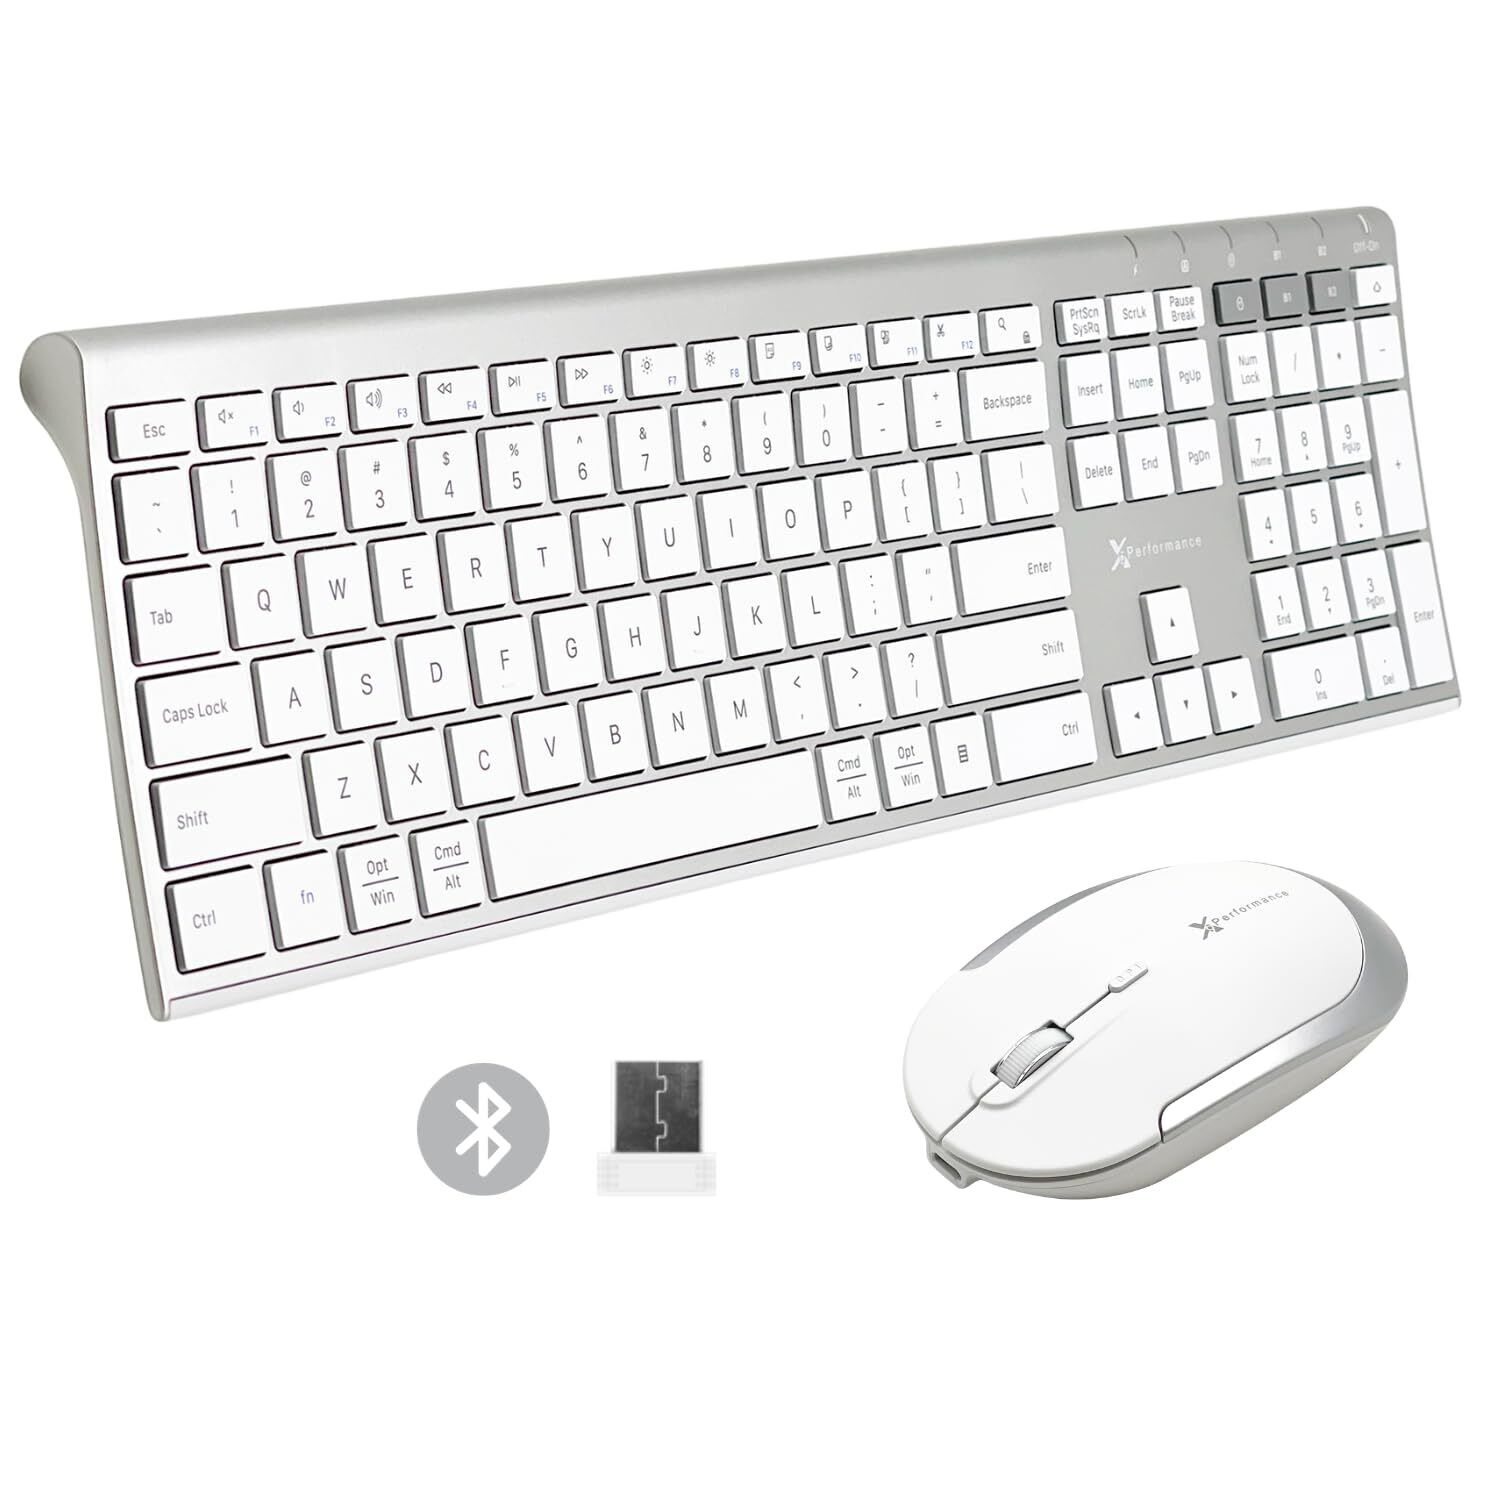 X9 Slim Bluetooth Keyboard and Combo - Dual BT + 2.4G Pair 3 Devices - Full-s...